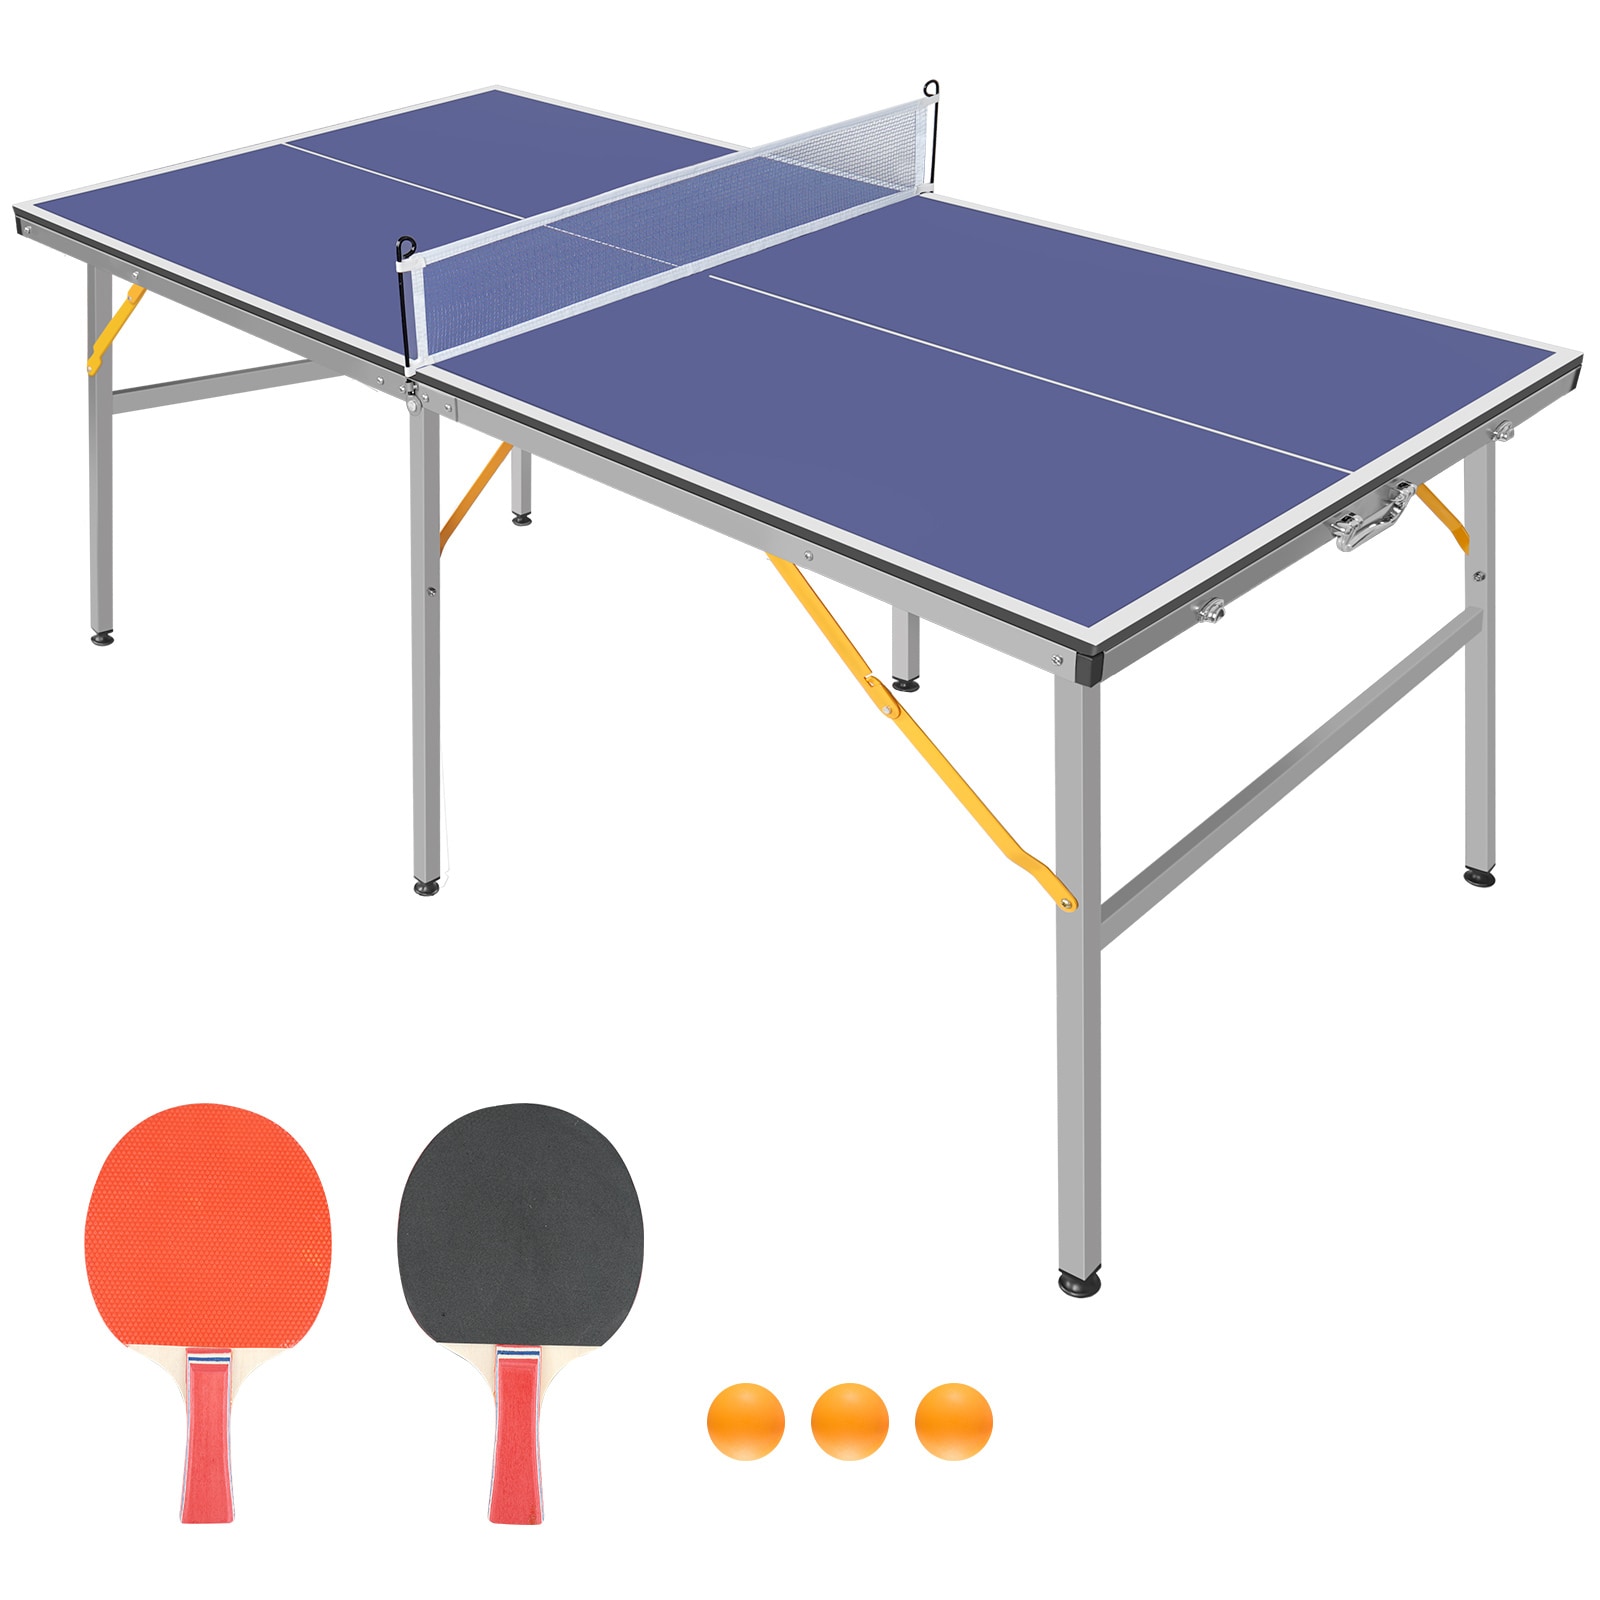 700 Ping Pong Tables and Spaces ideas